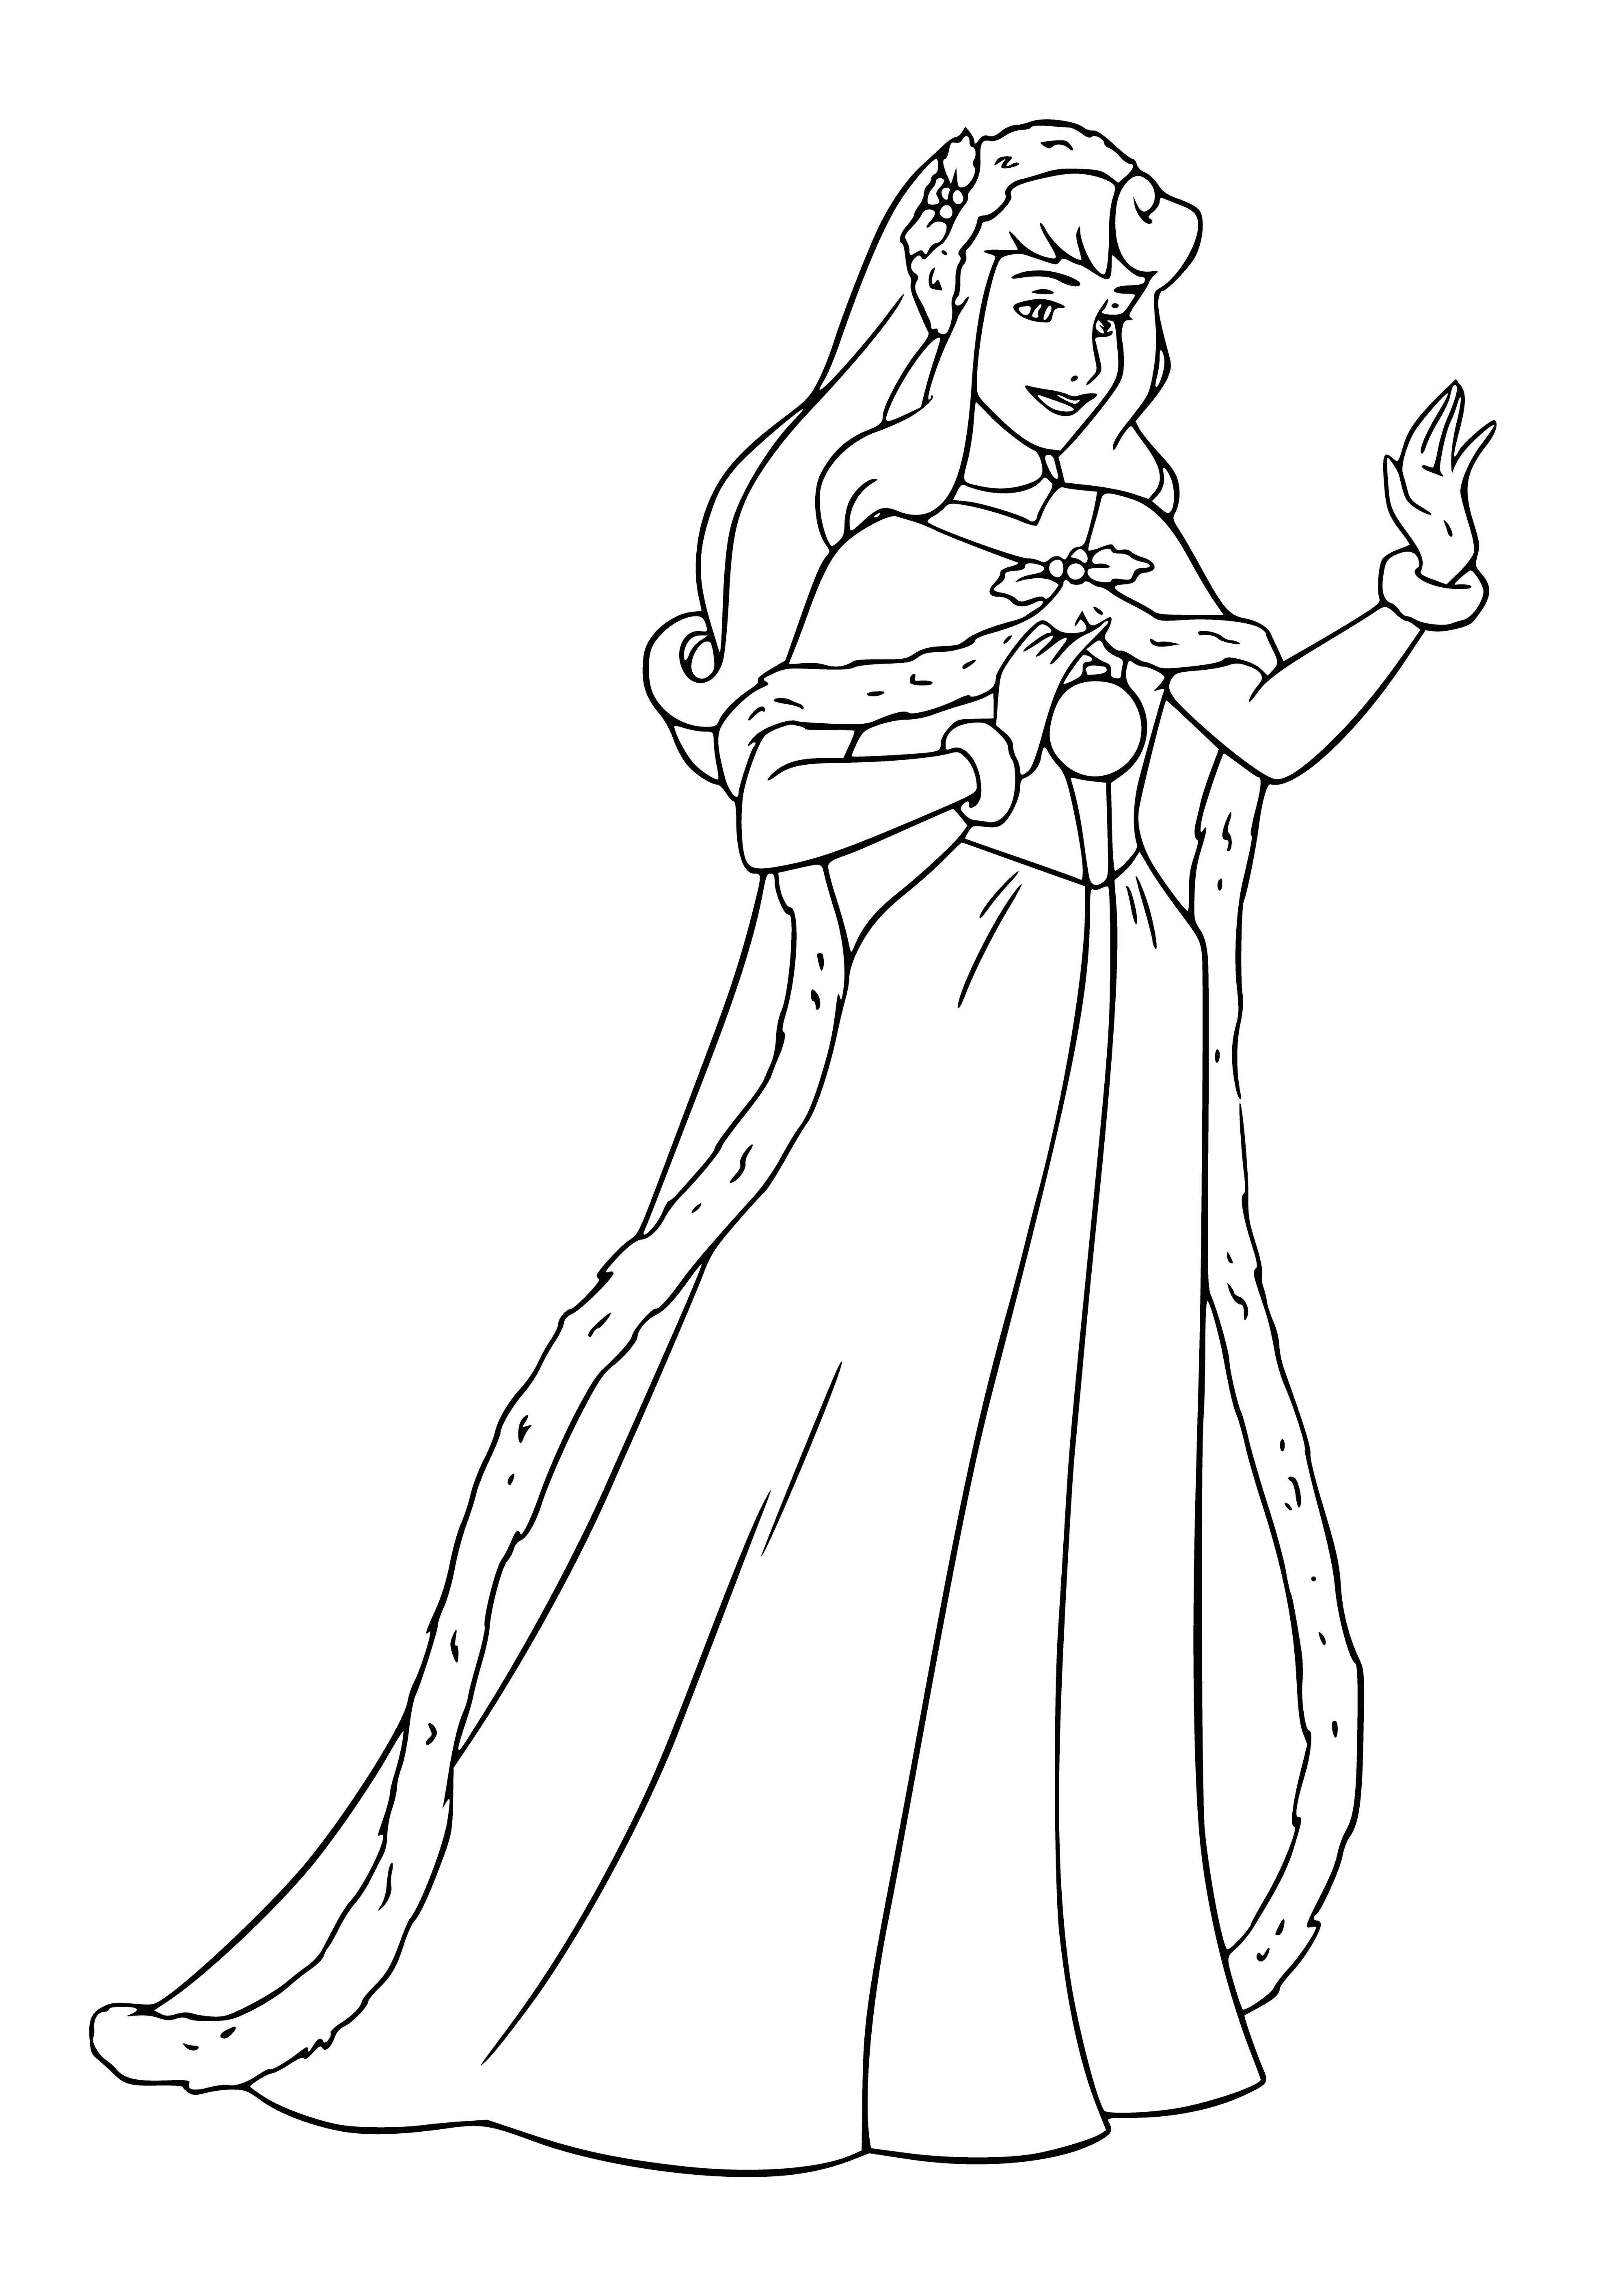 coloring page: Cinderella is making a wish. Snow White is singing with the birds. 

Disney princesses celebrate New Year: Aurora admires fireworks, Cinderella makes a wish, Snow White sings with birds! #DisneyNYE